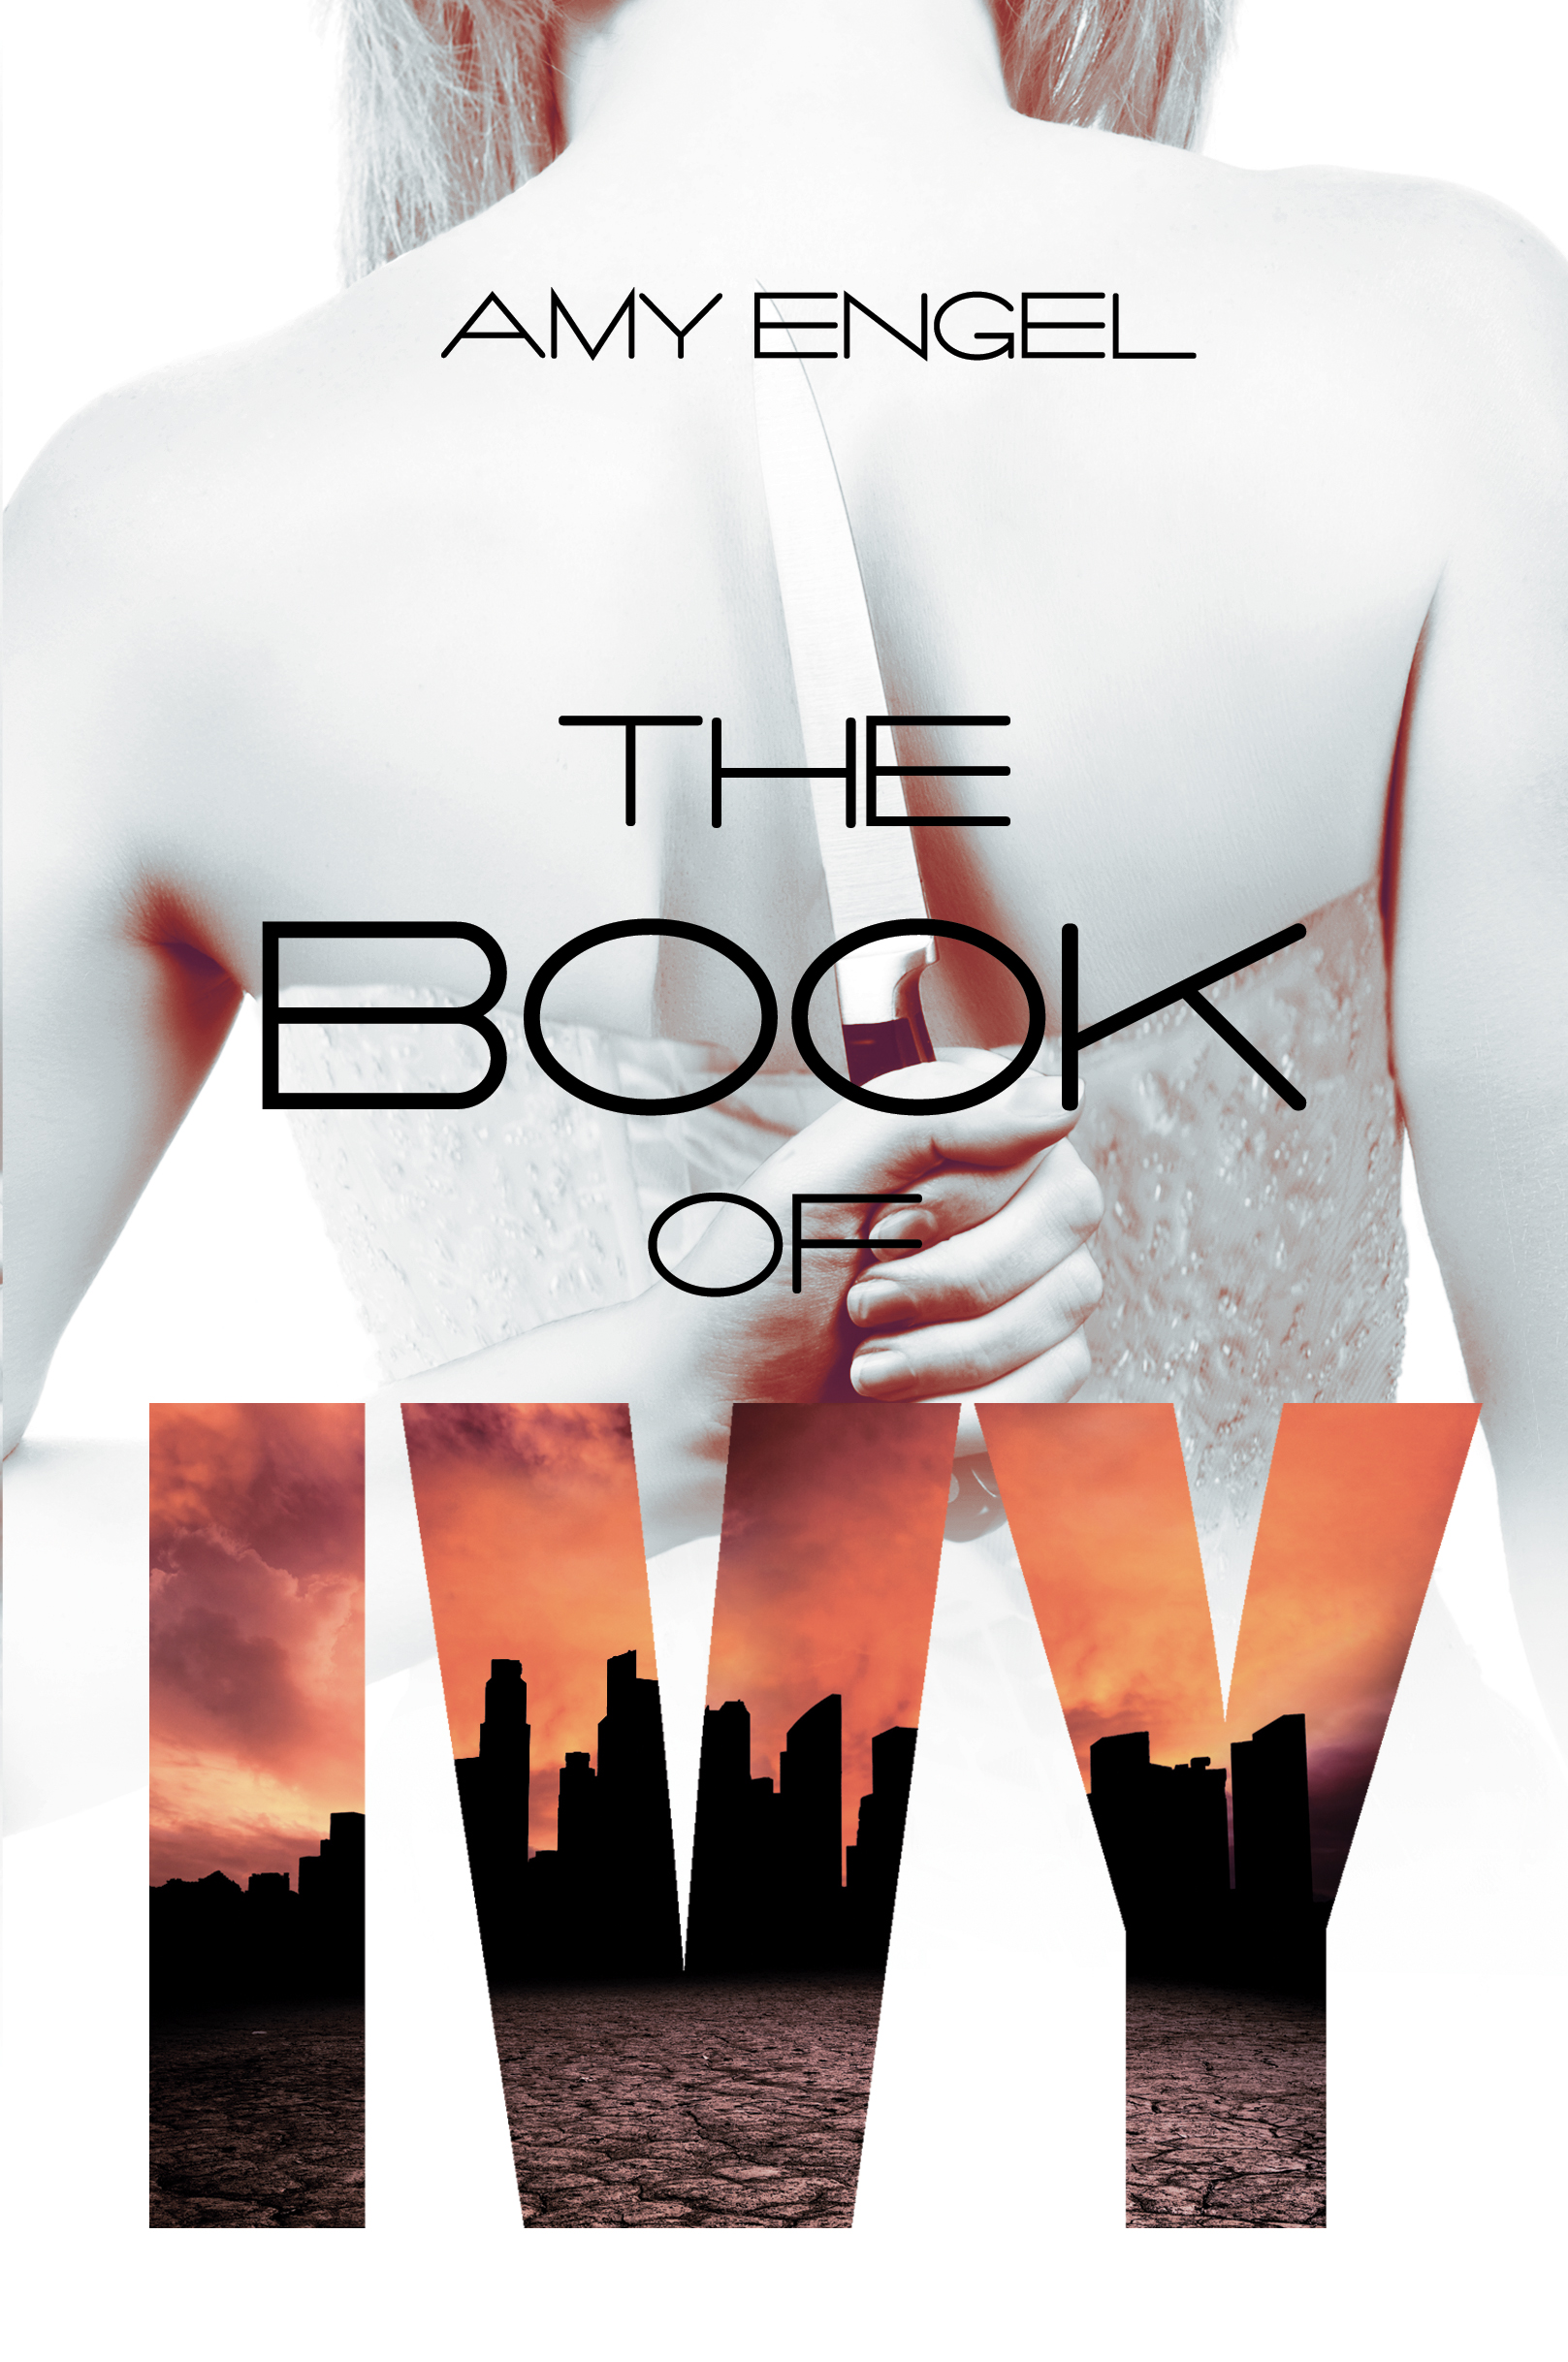 BOOK OF IVY, THE